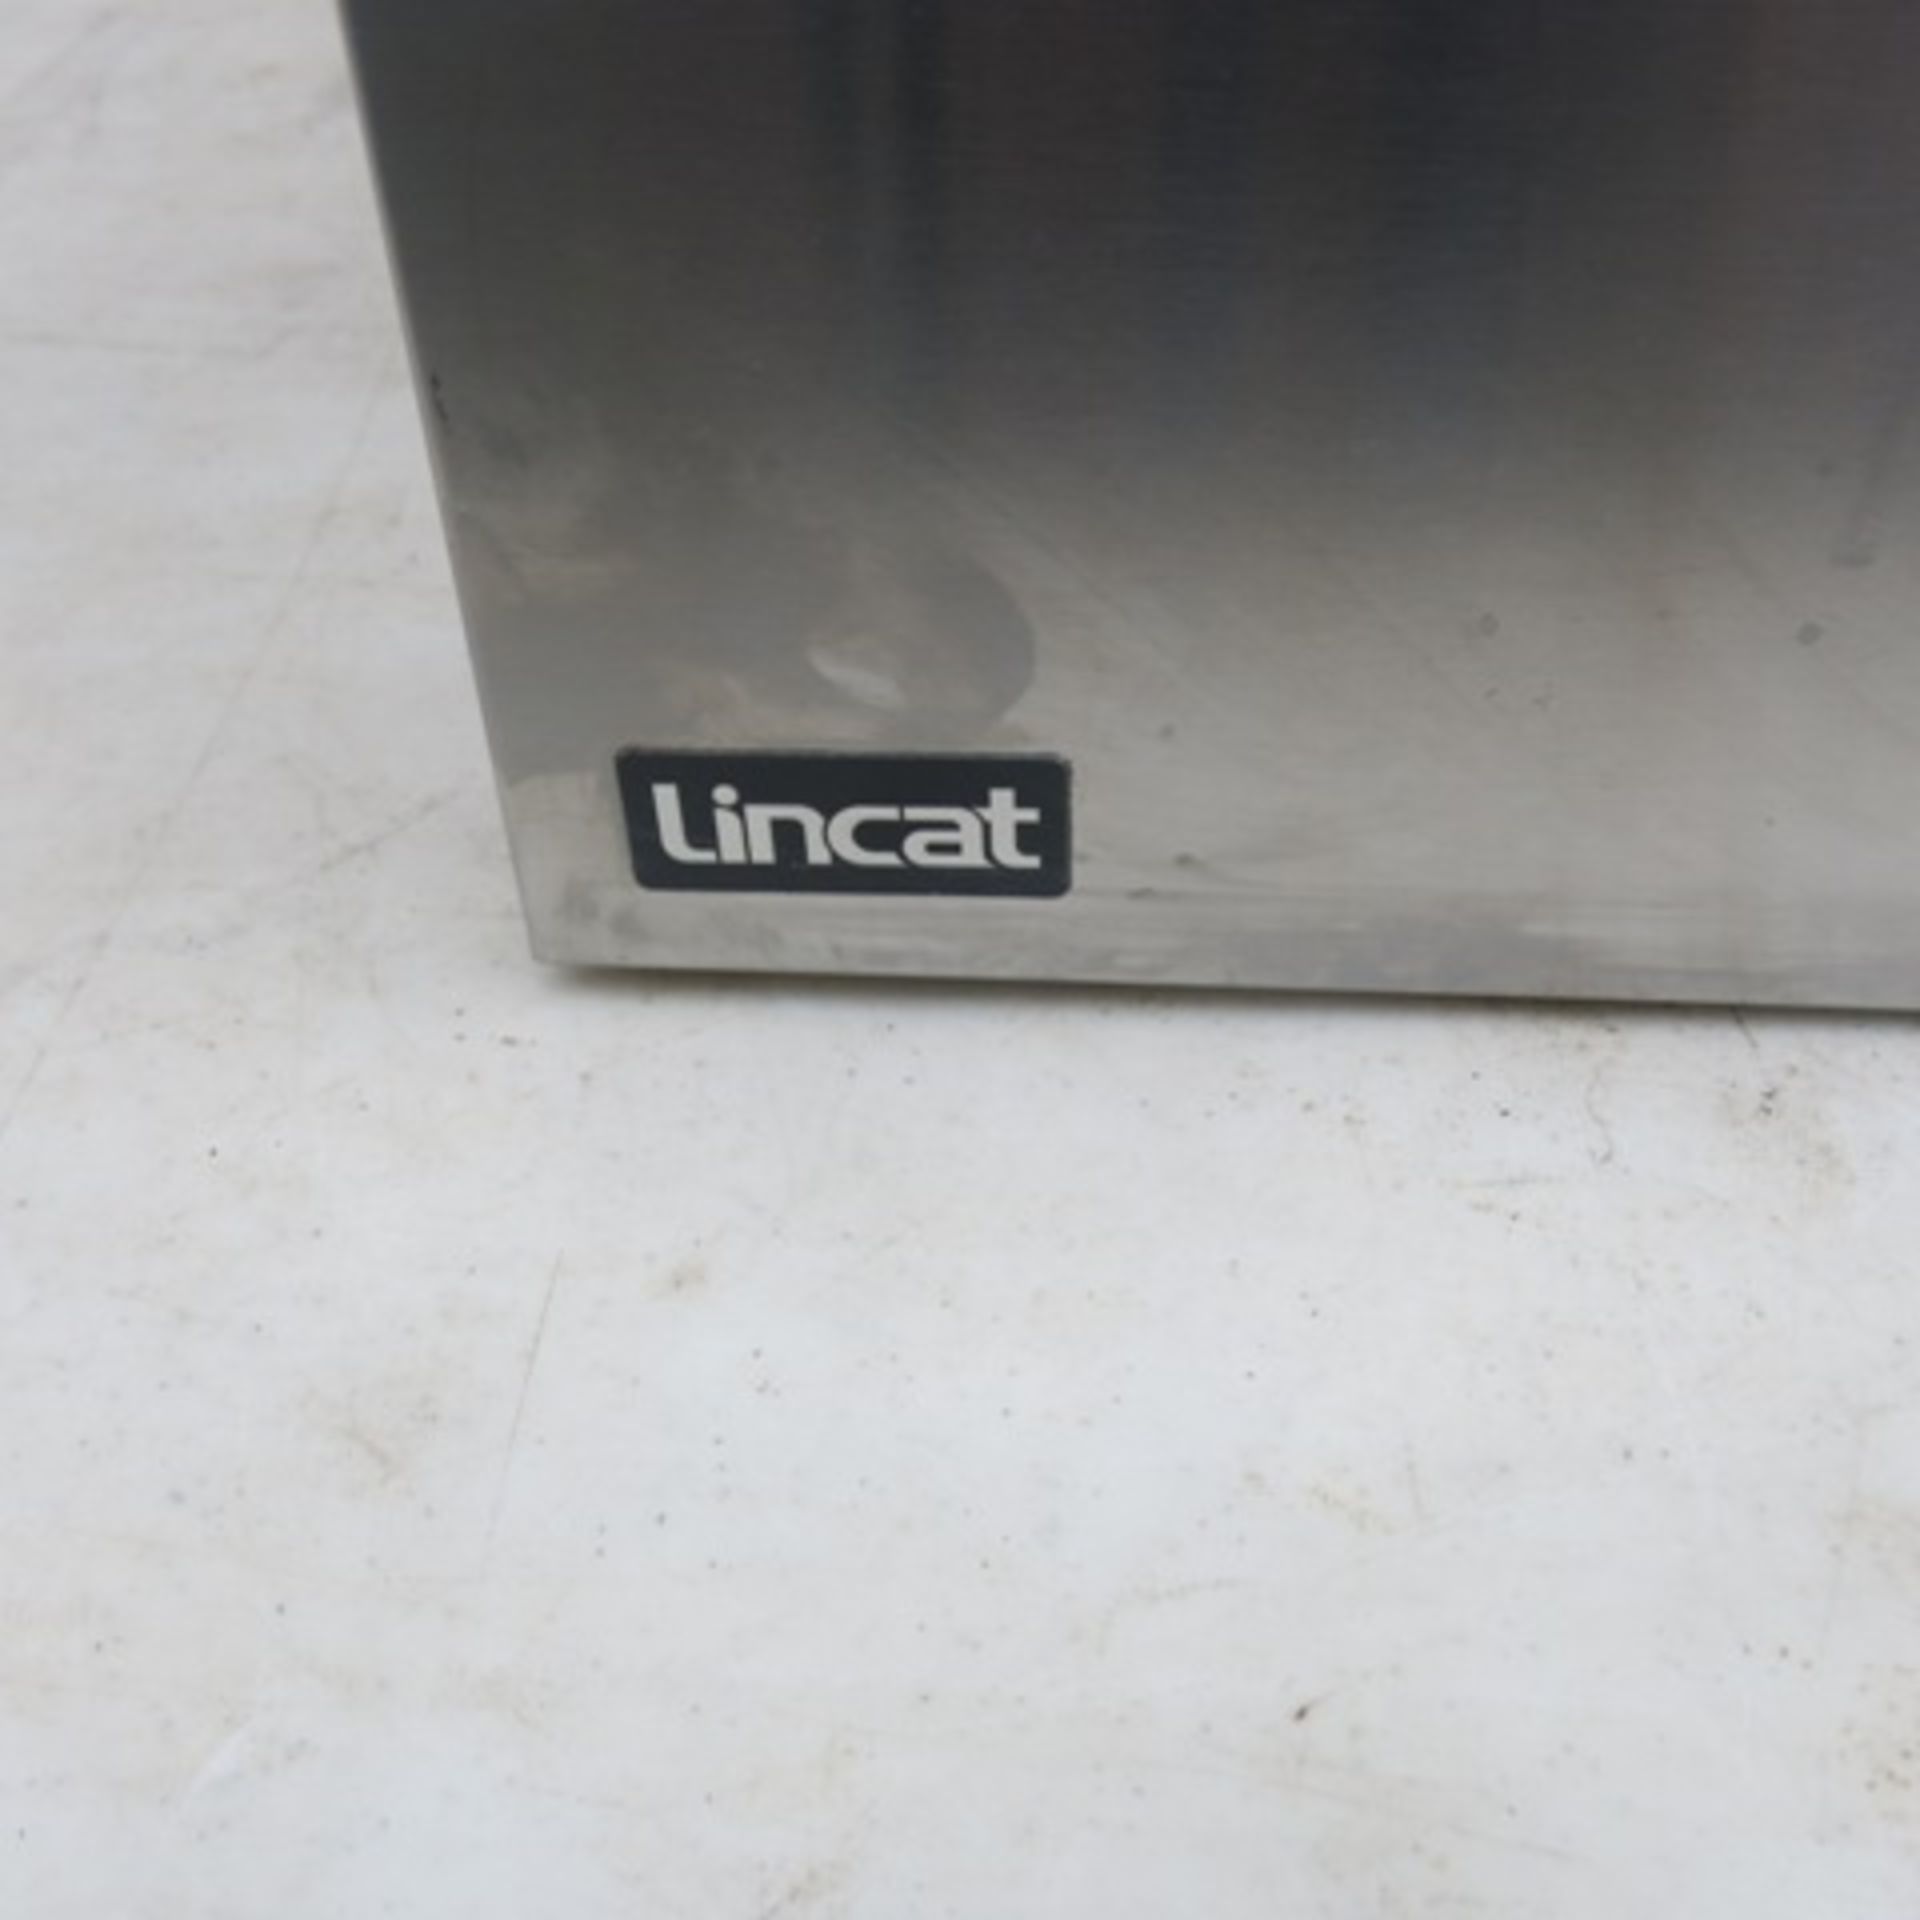 Lincat Counter Top Electric Bain Marie, Model LRB2W. Comes with 2 Round Pots - Image 2 of 6